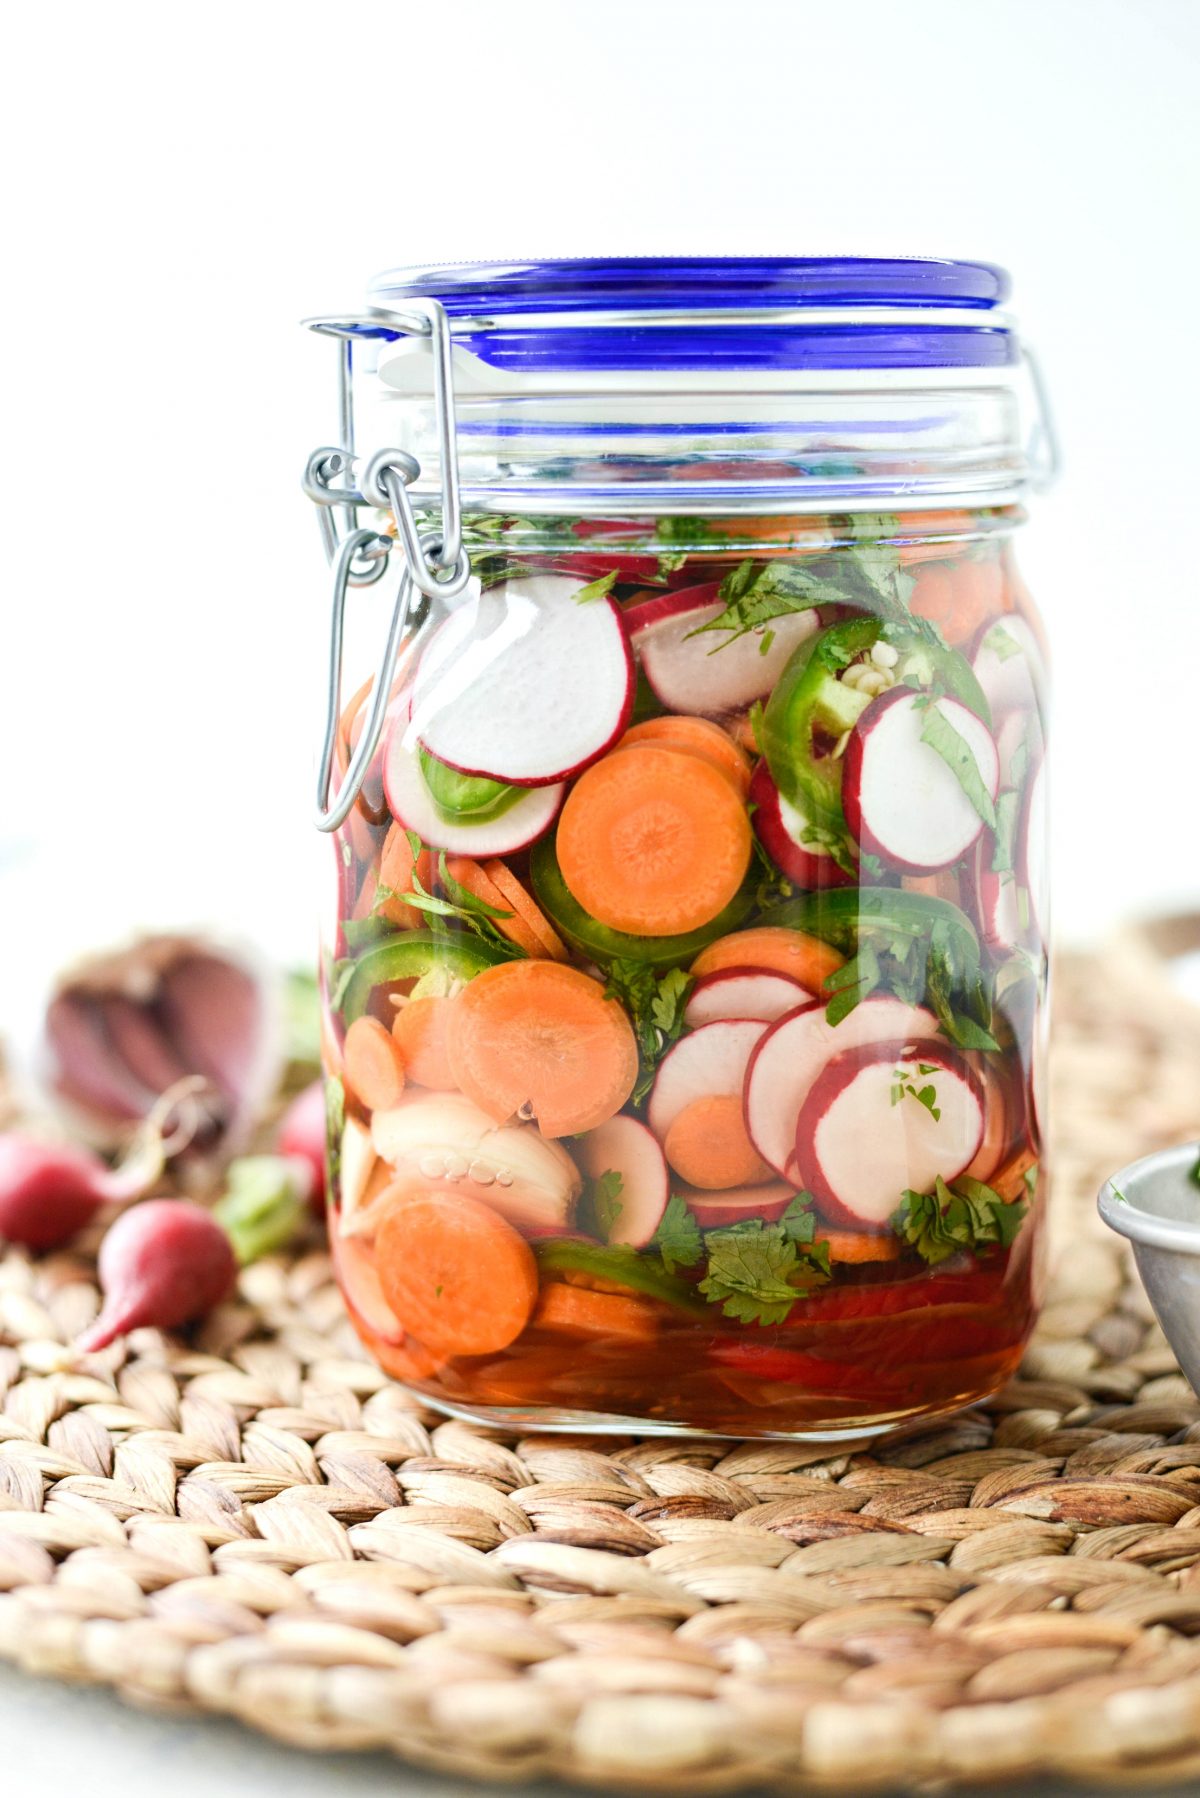 Spicy Pickled Vegetables l SimplyScratch.com #quickpickles #easy #pickled #vegetables #recipe #refrigeratorpickles #summerrecipe